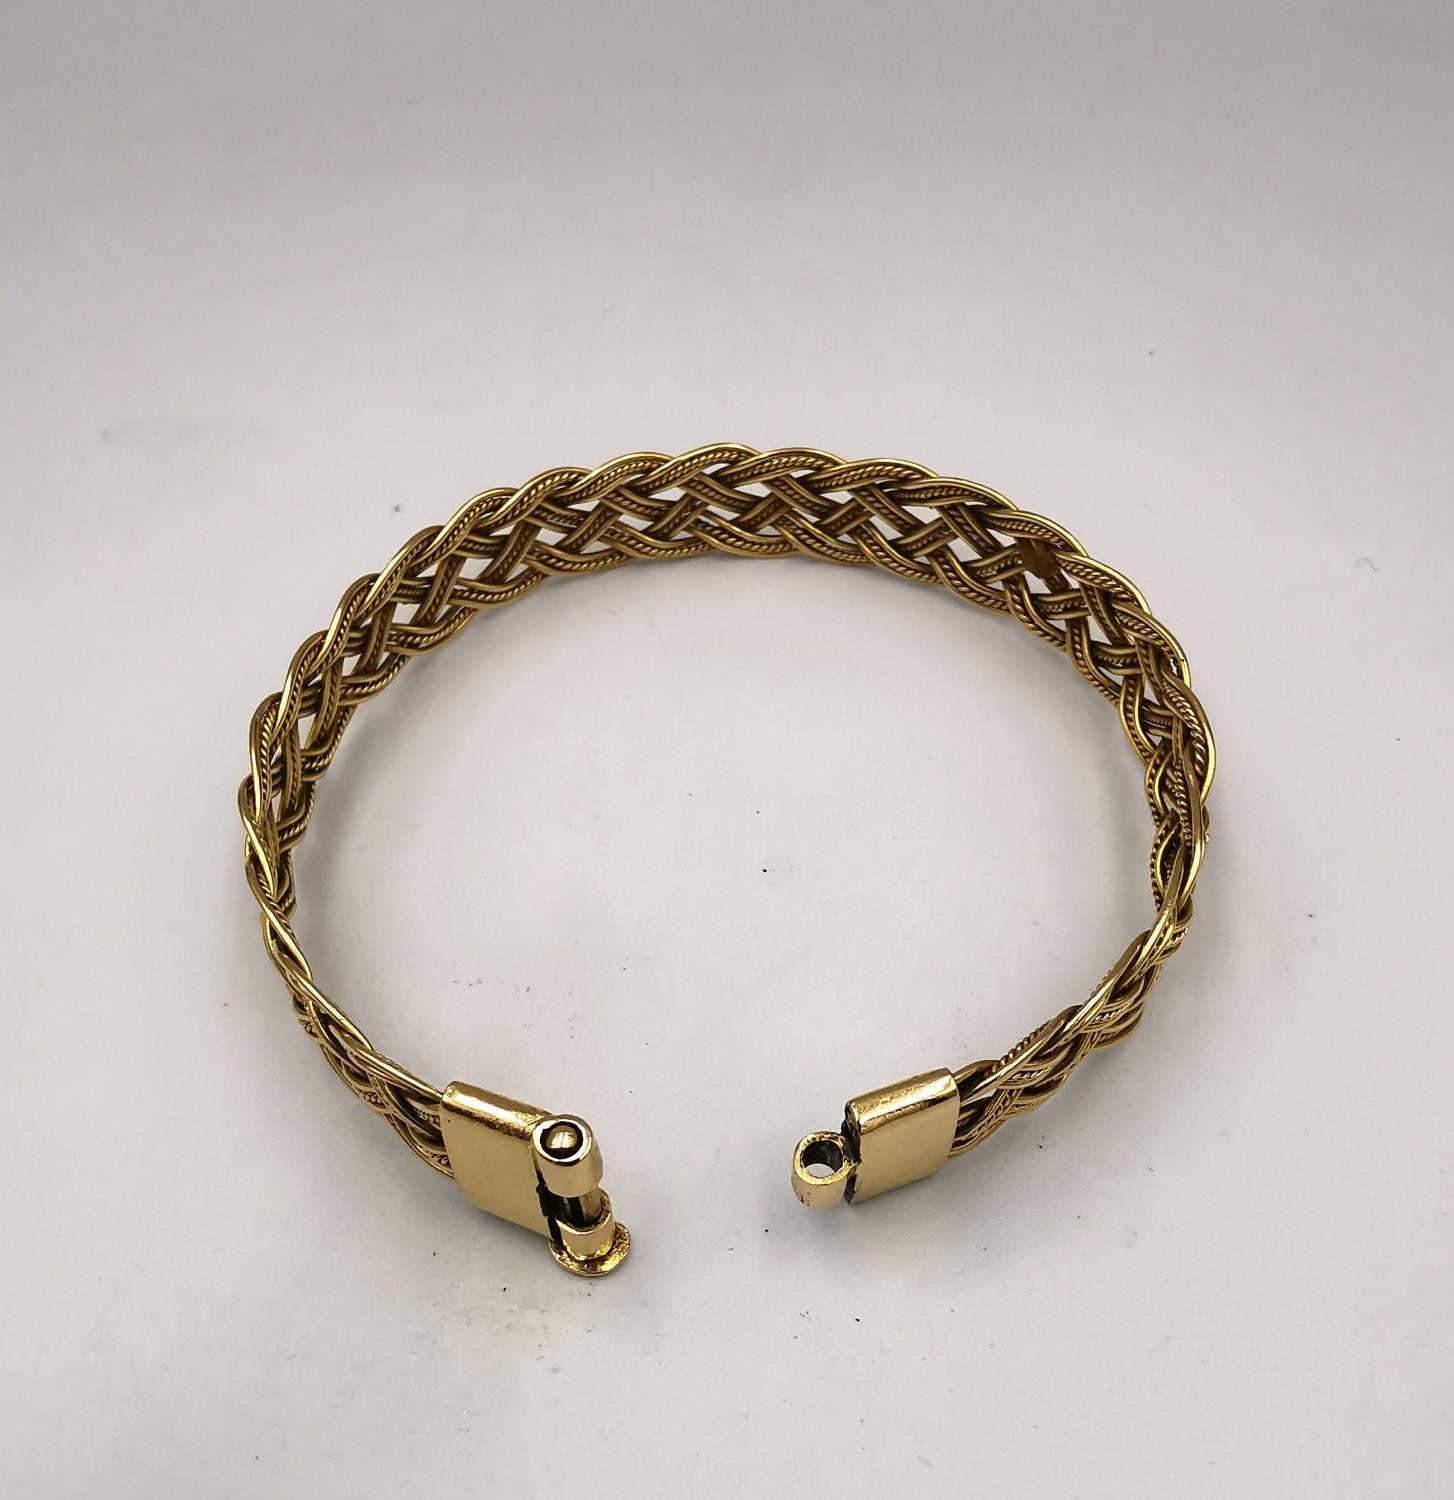 A woven gold plated wirework plaited bracelet with pin fastening. Diameter 6cm. Weight 18.62g. - Image 5 of 10